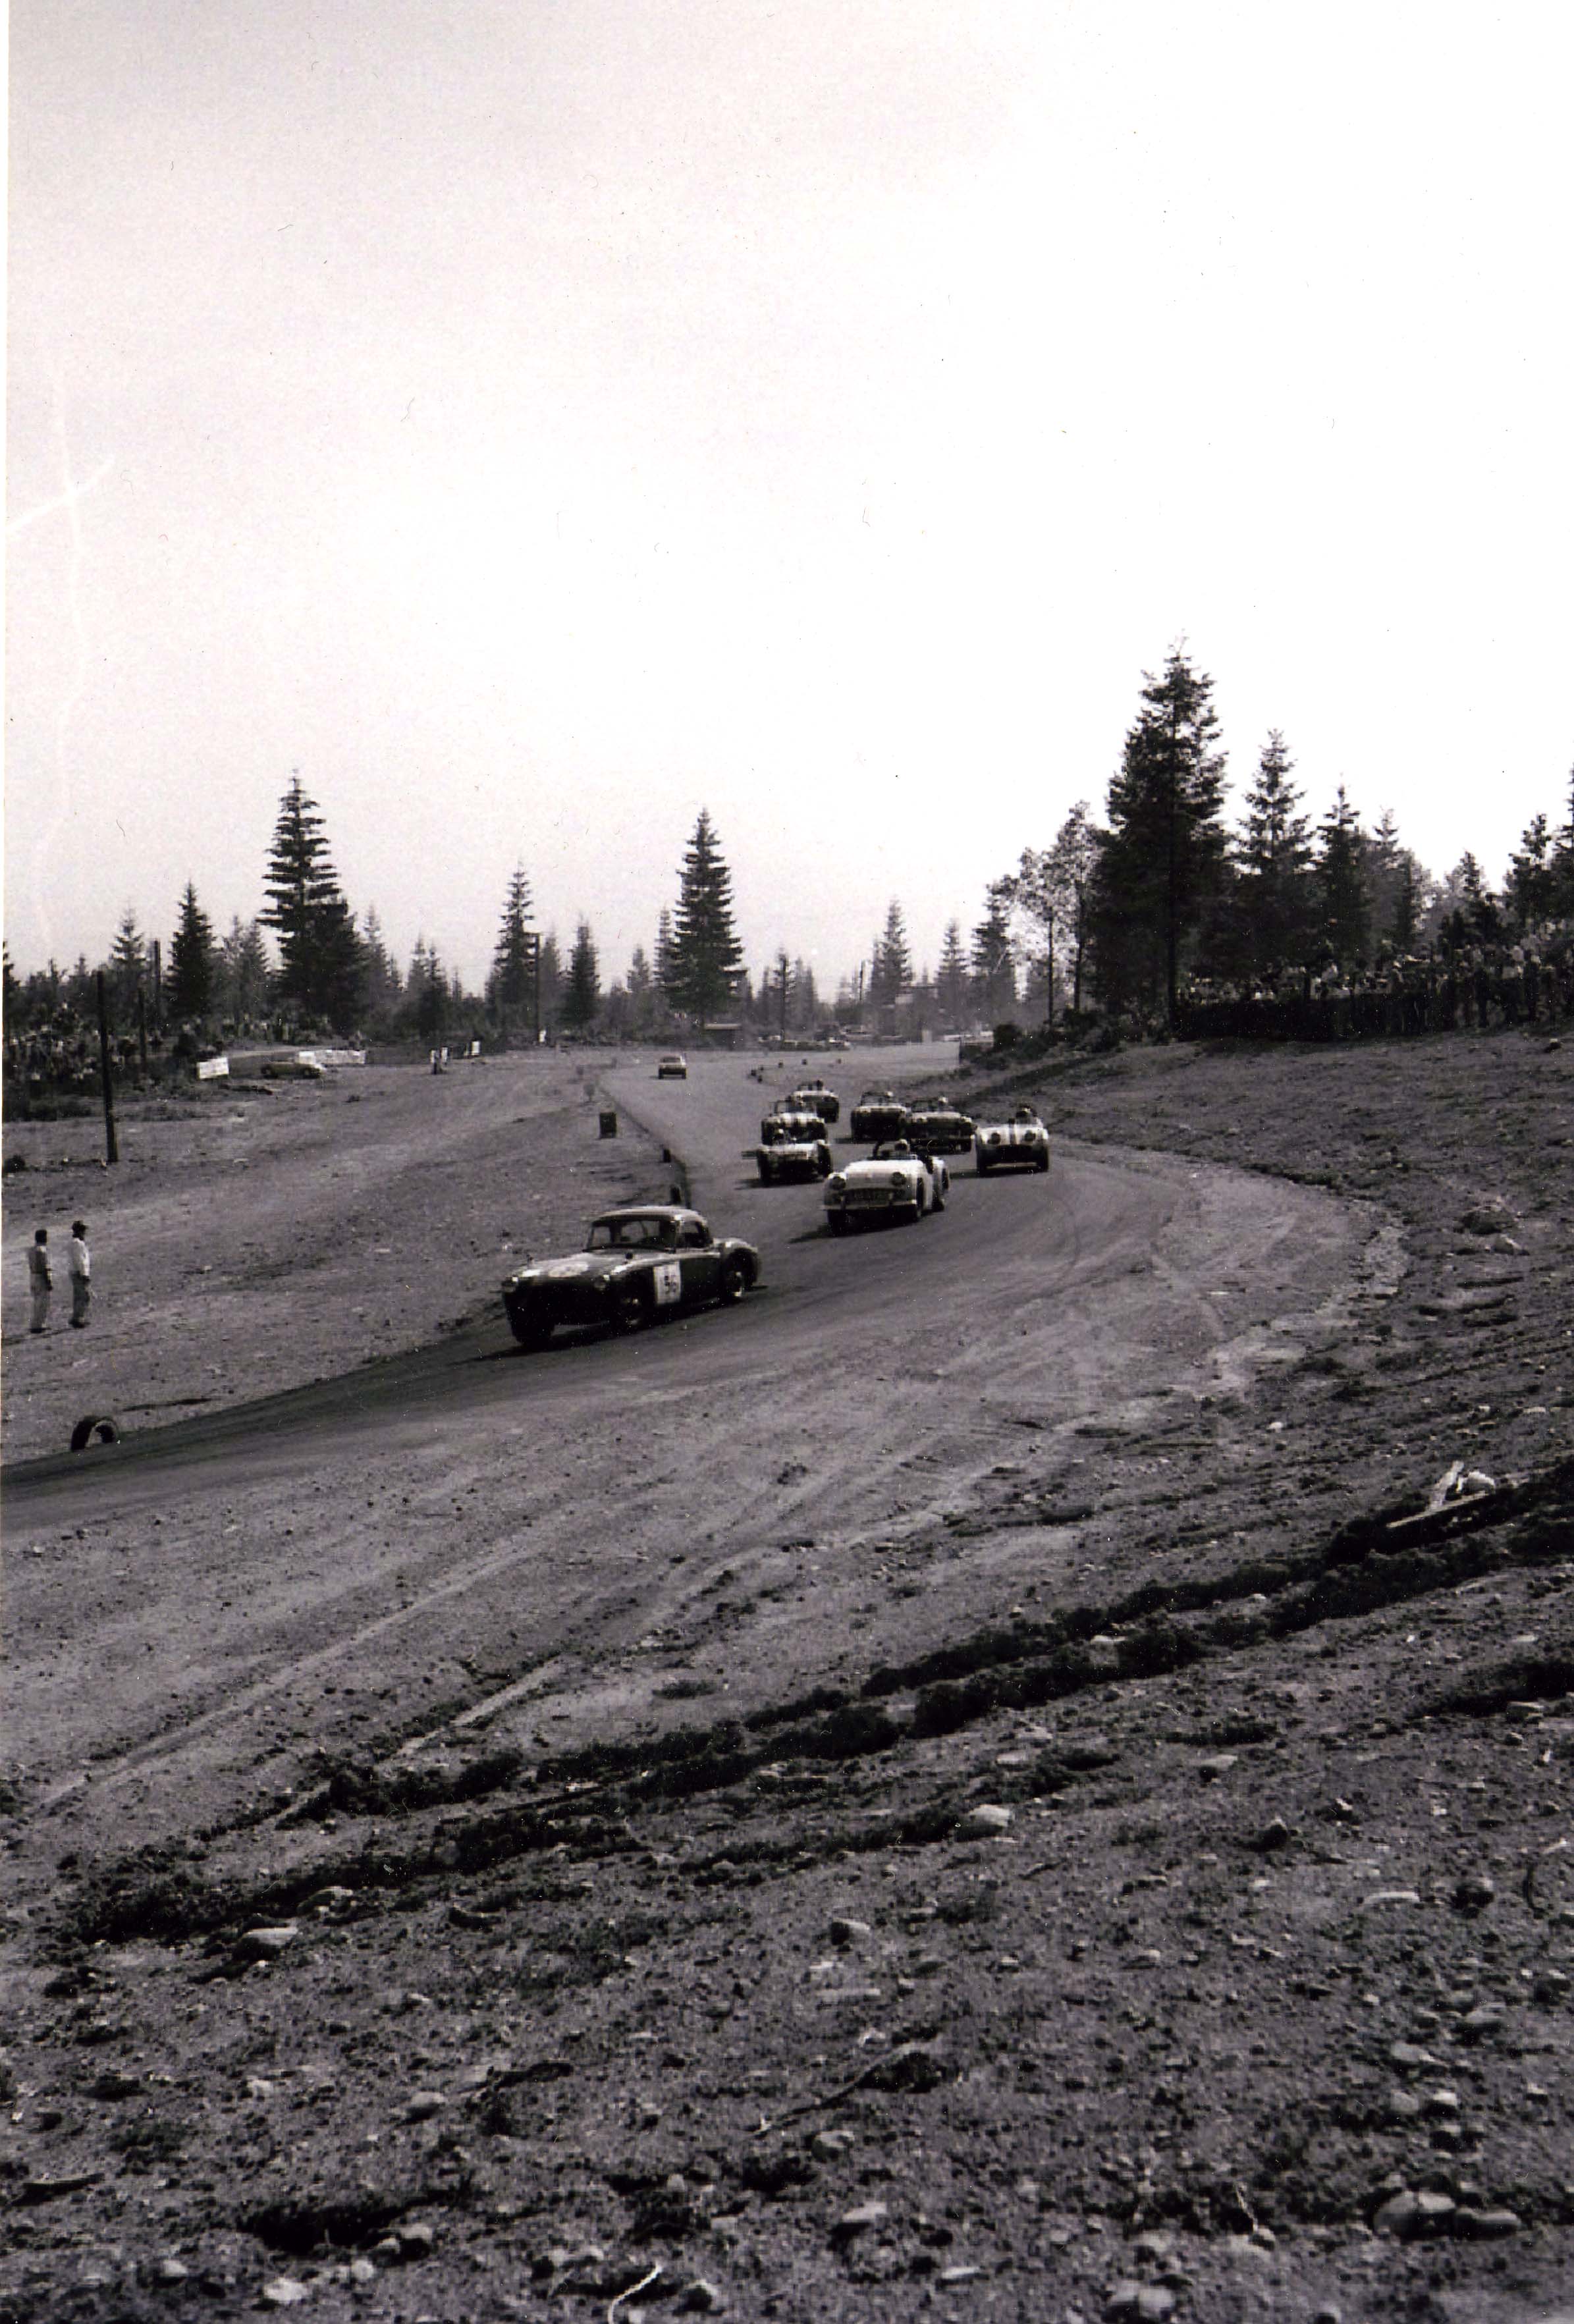 Margaret Hortin in Her MGA Coupe Leading the Pack in the Powder Puff Series, September 11, 1960 (JPG) Opens in new window